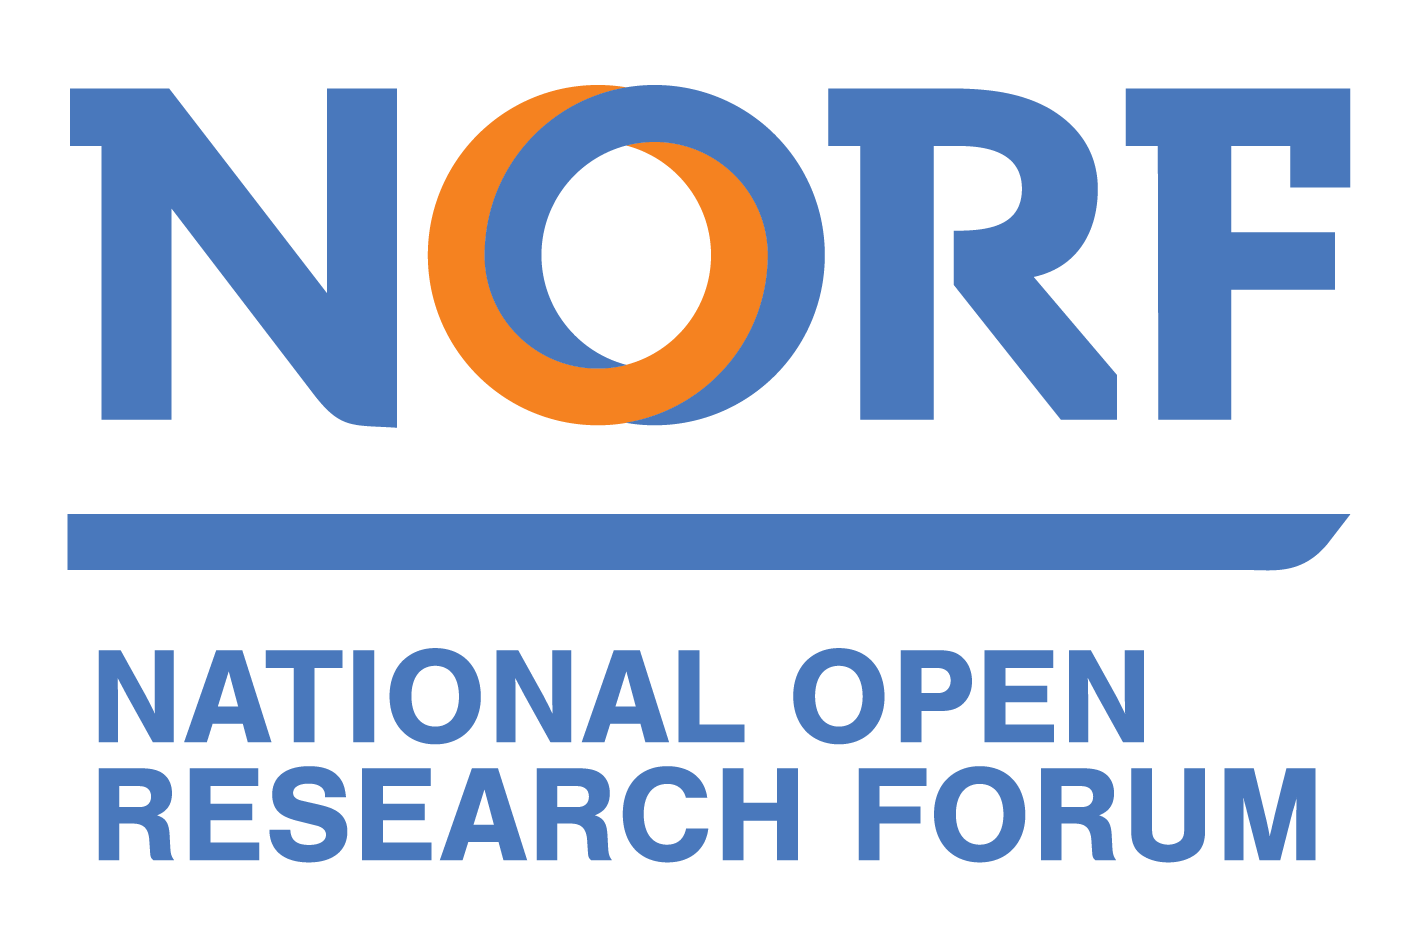 National Open Research Forum